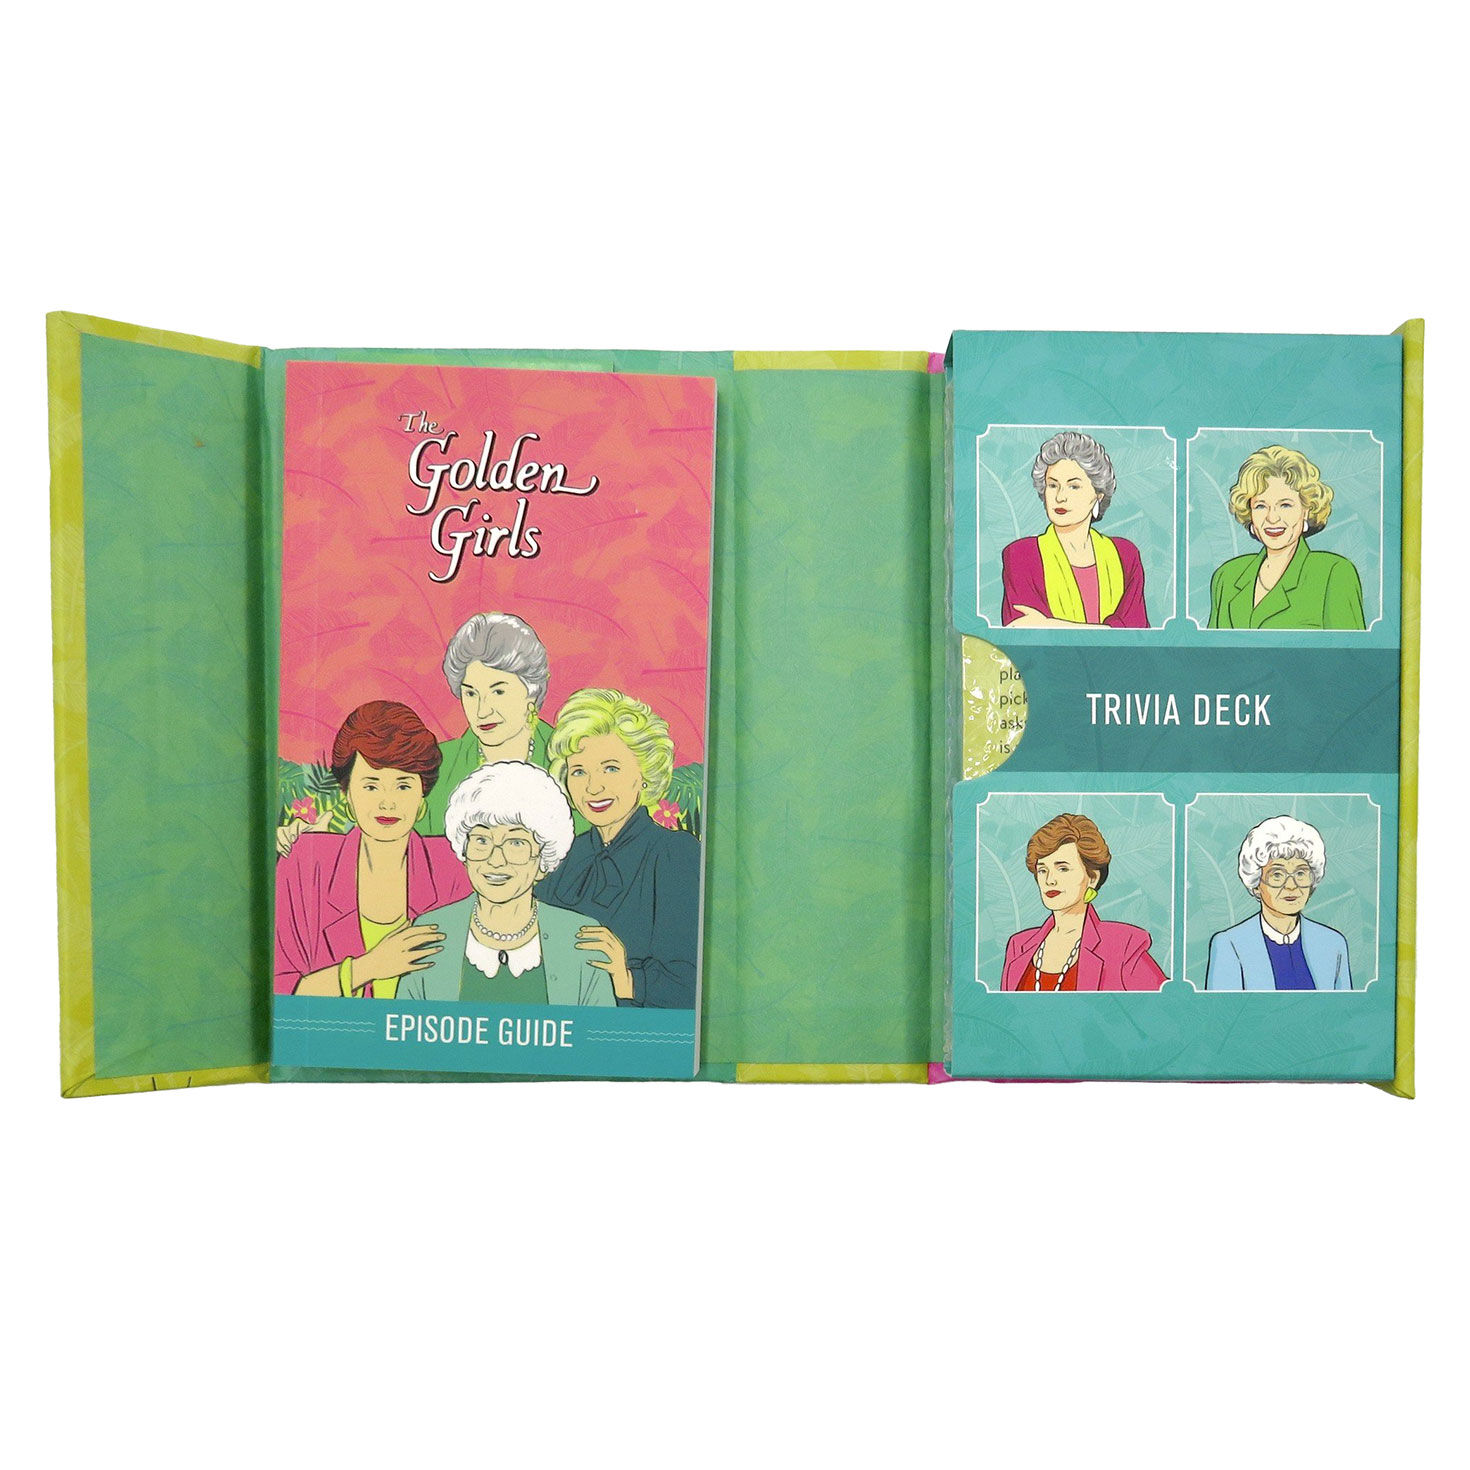 Golden Girls Trivia Deck and Episode Guide for only USD 18.00 | Hallmark